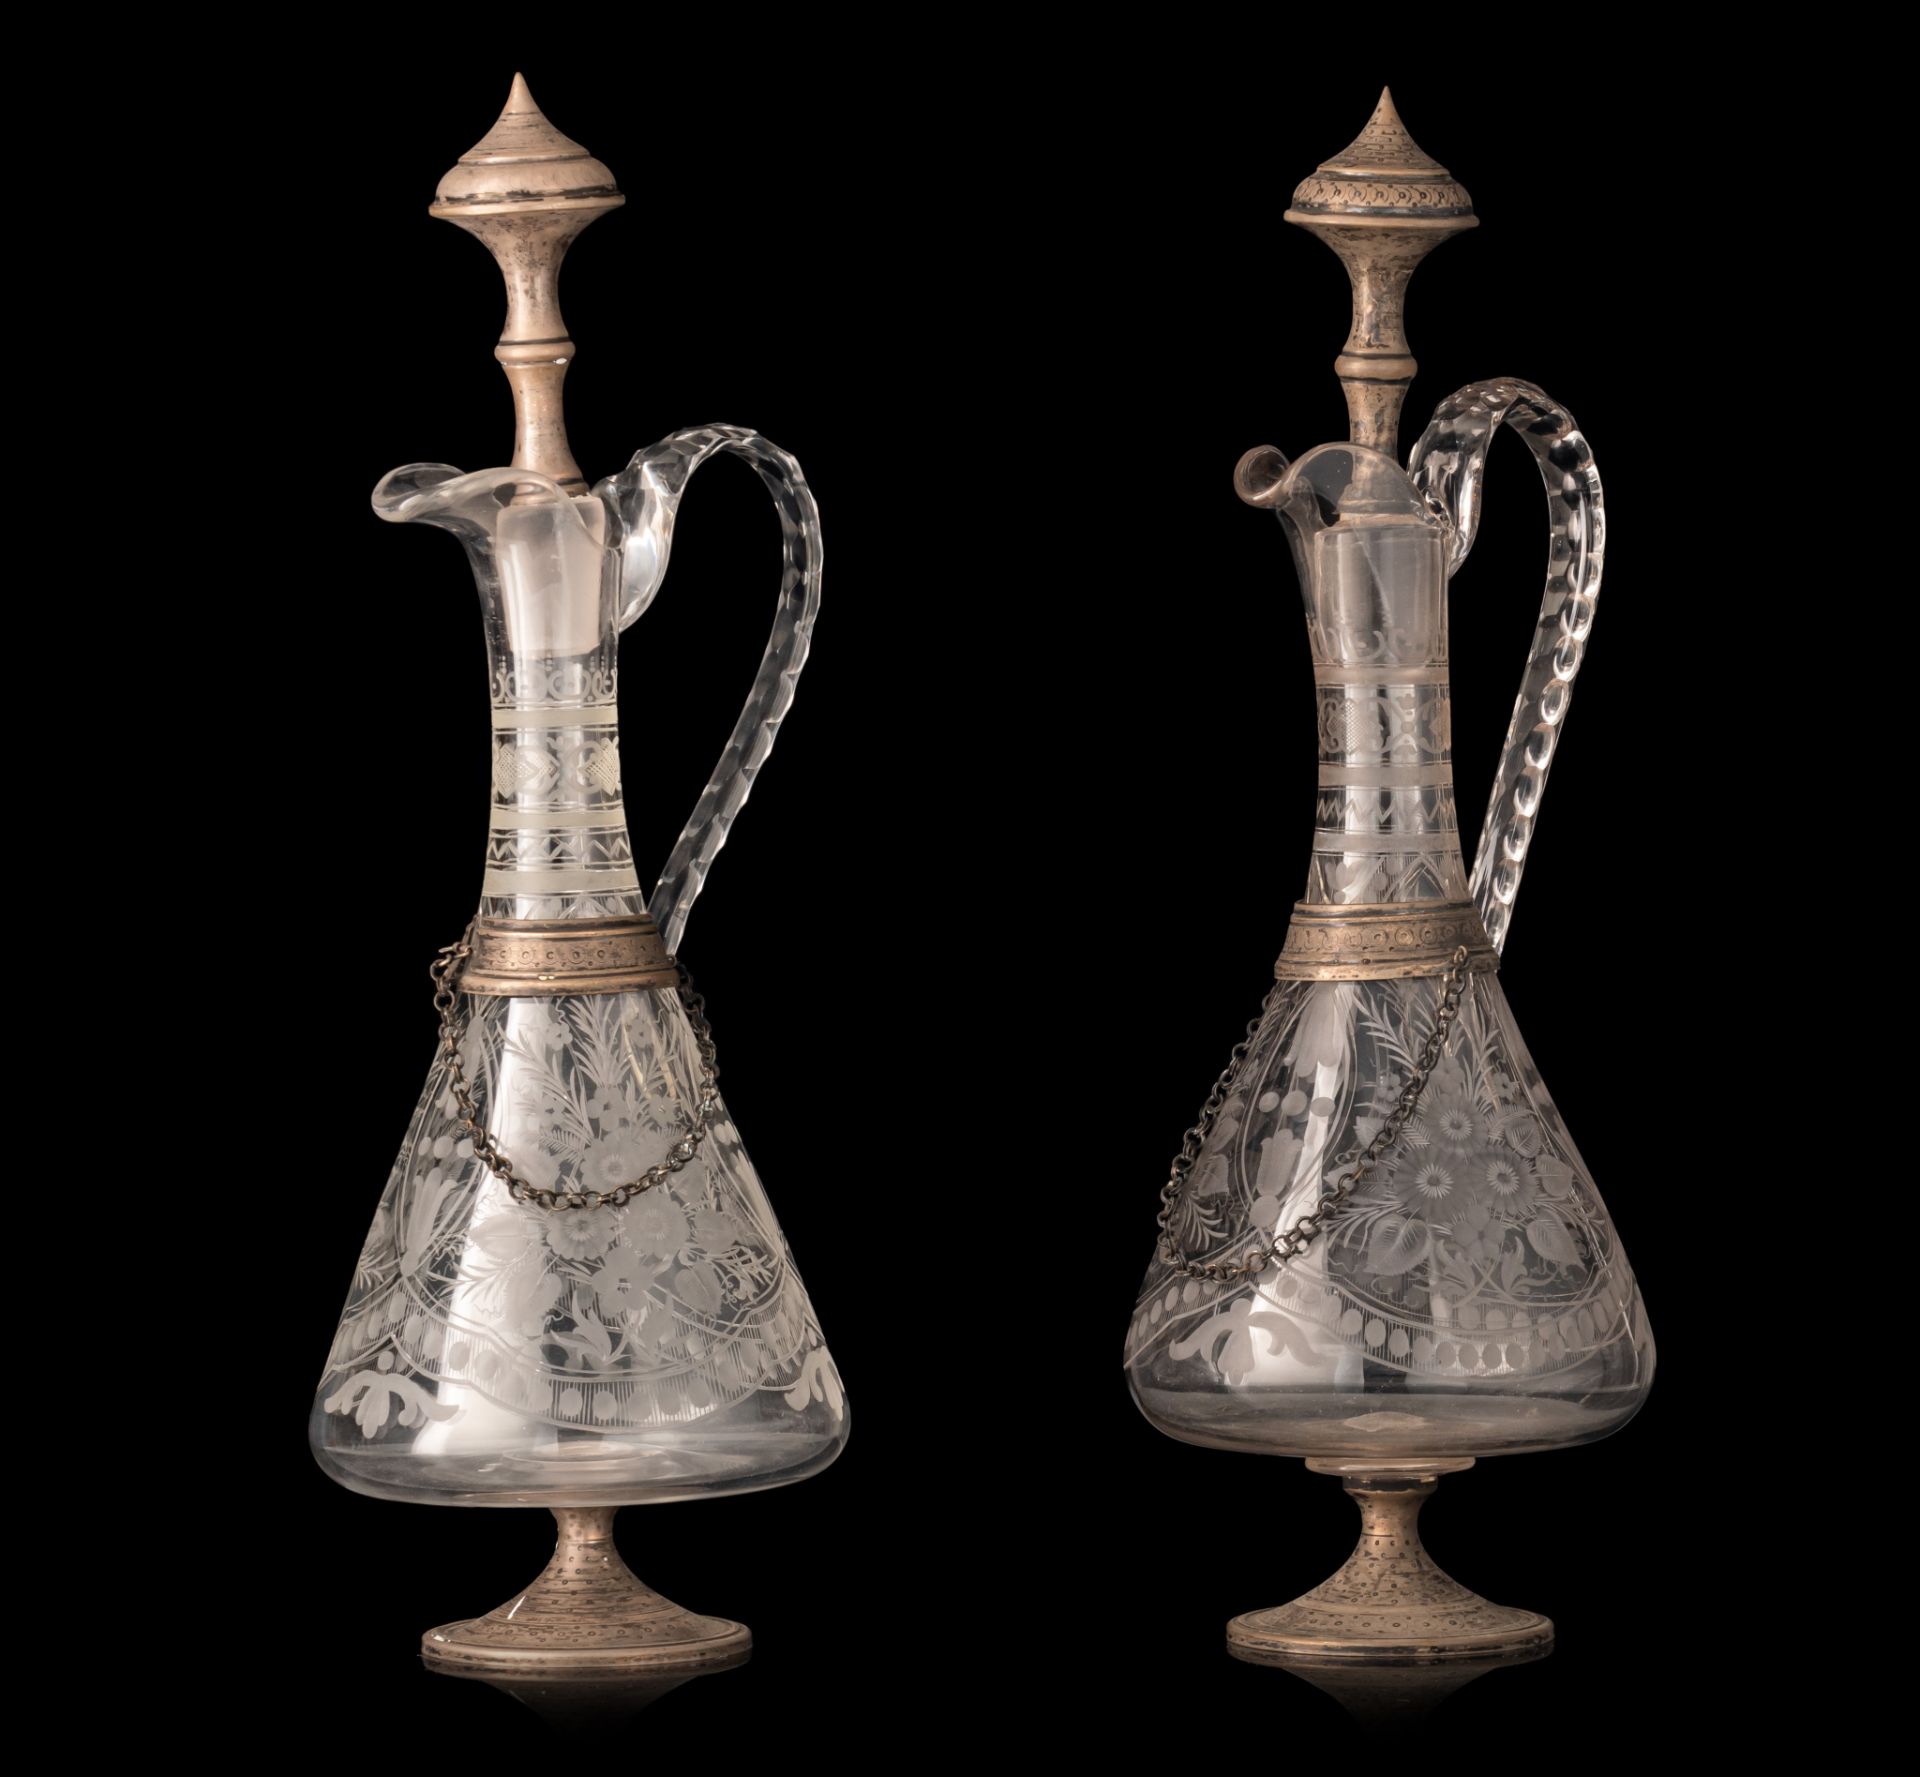 A pair of glass, silver-plated brass mounted decanters, H 41 - 42 cm - Image 5 of 7